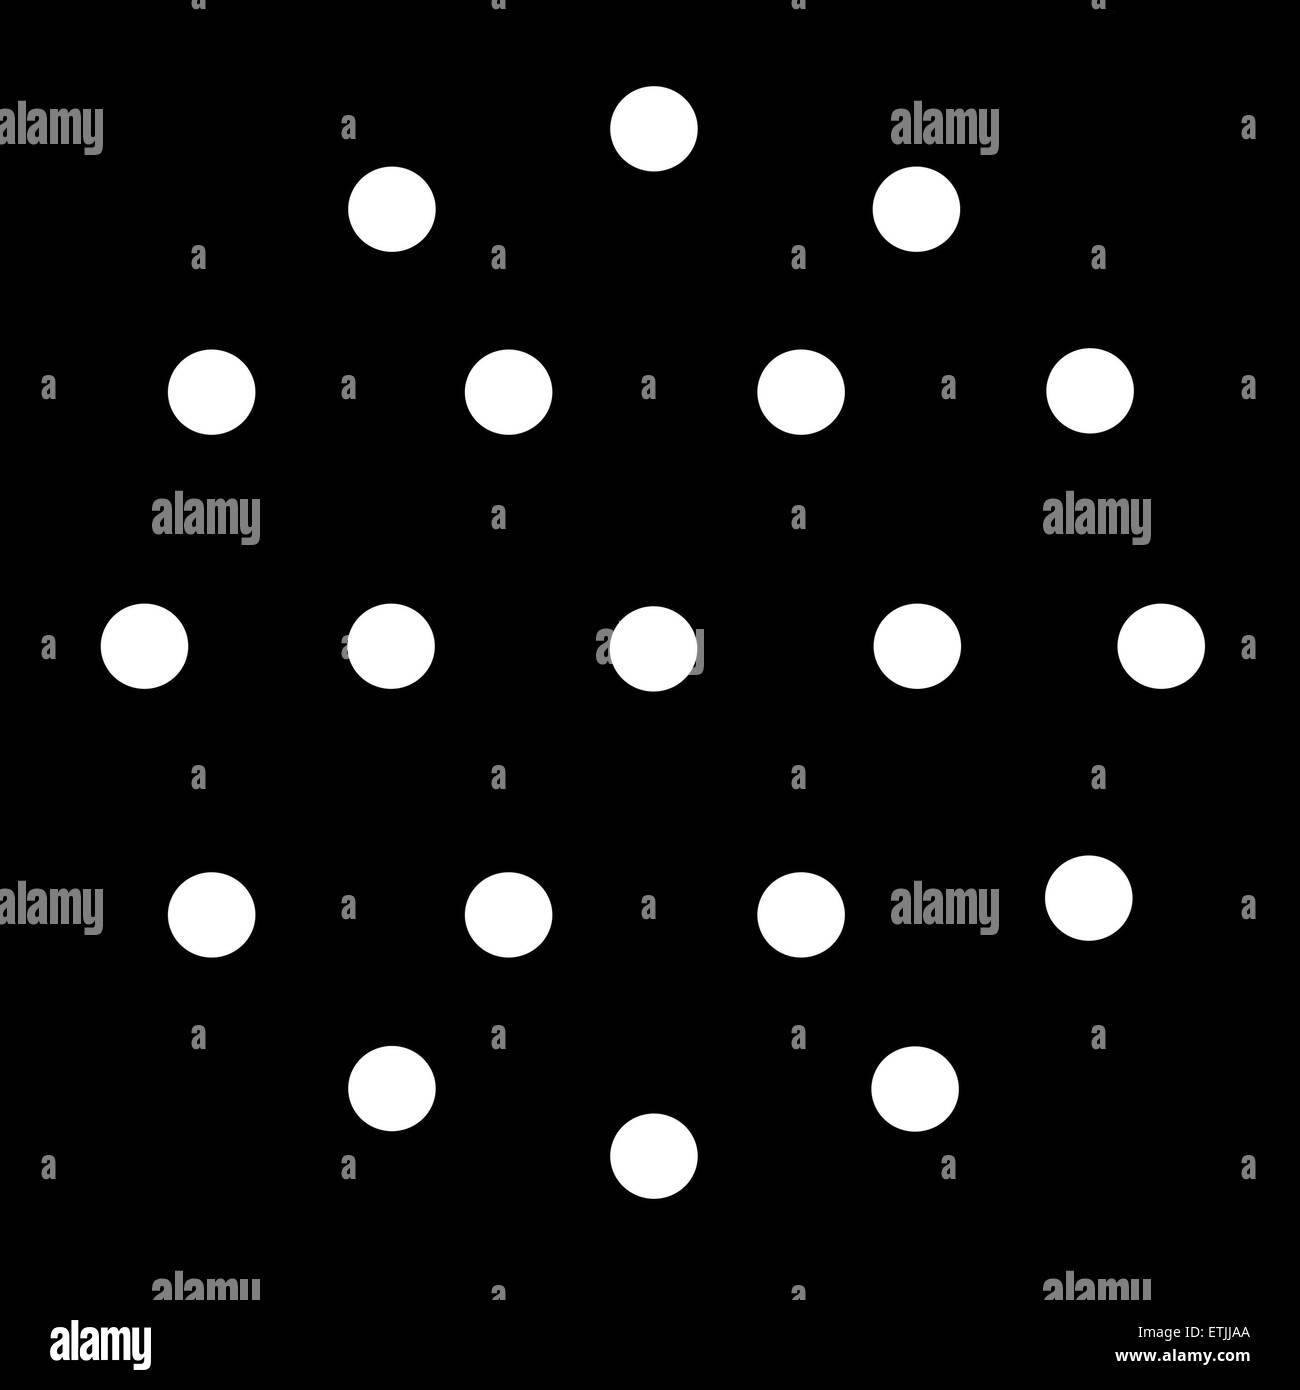 Circular geometric pattern made up of white dots on a black background Stock Photo